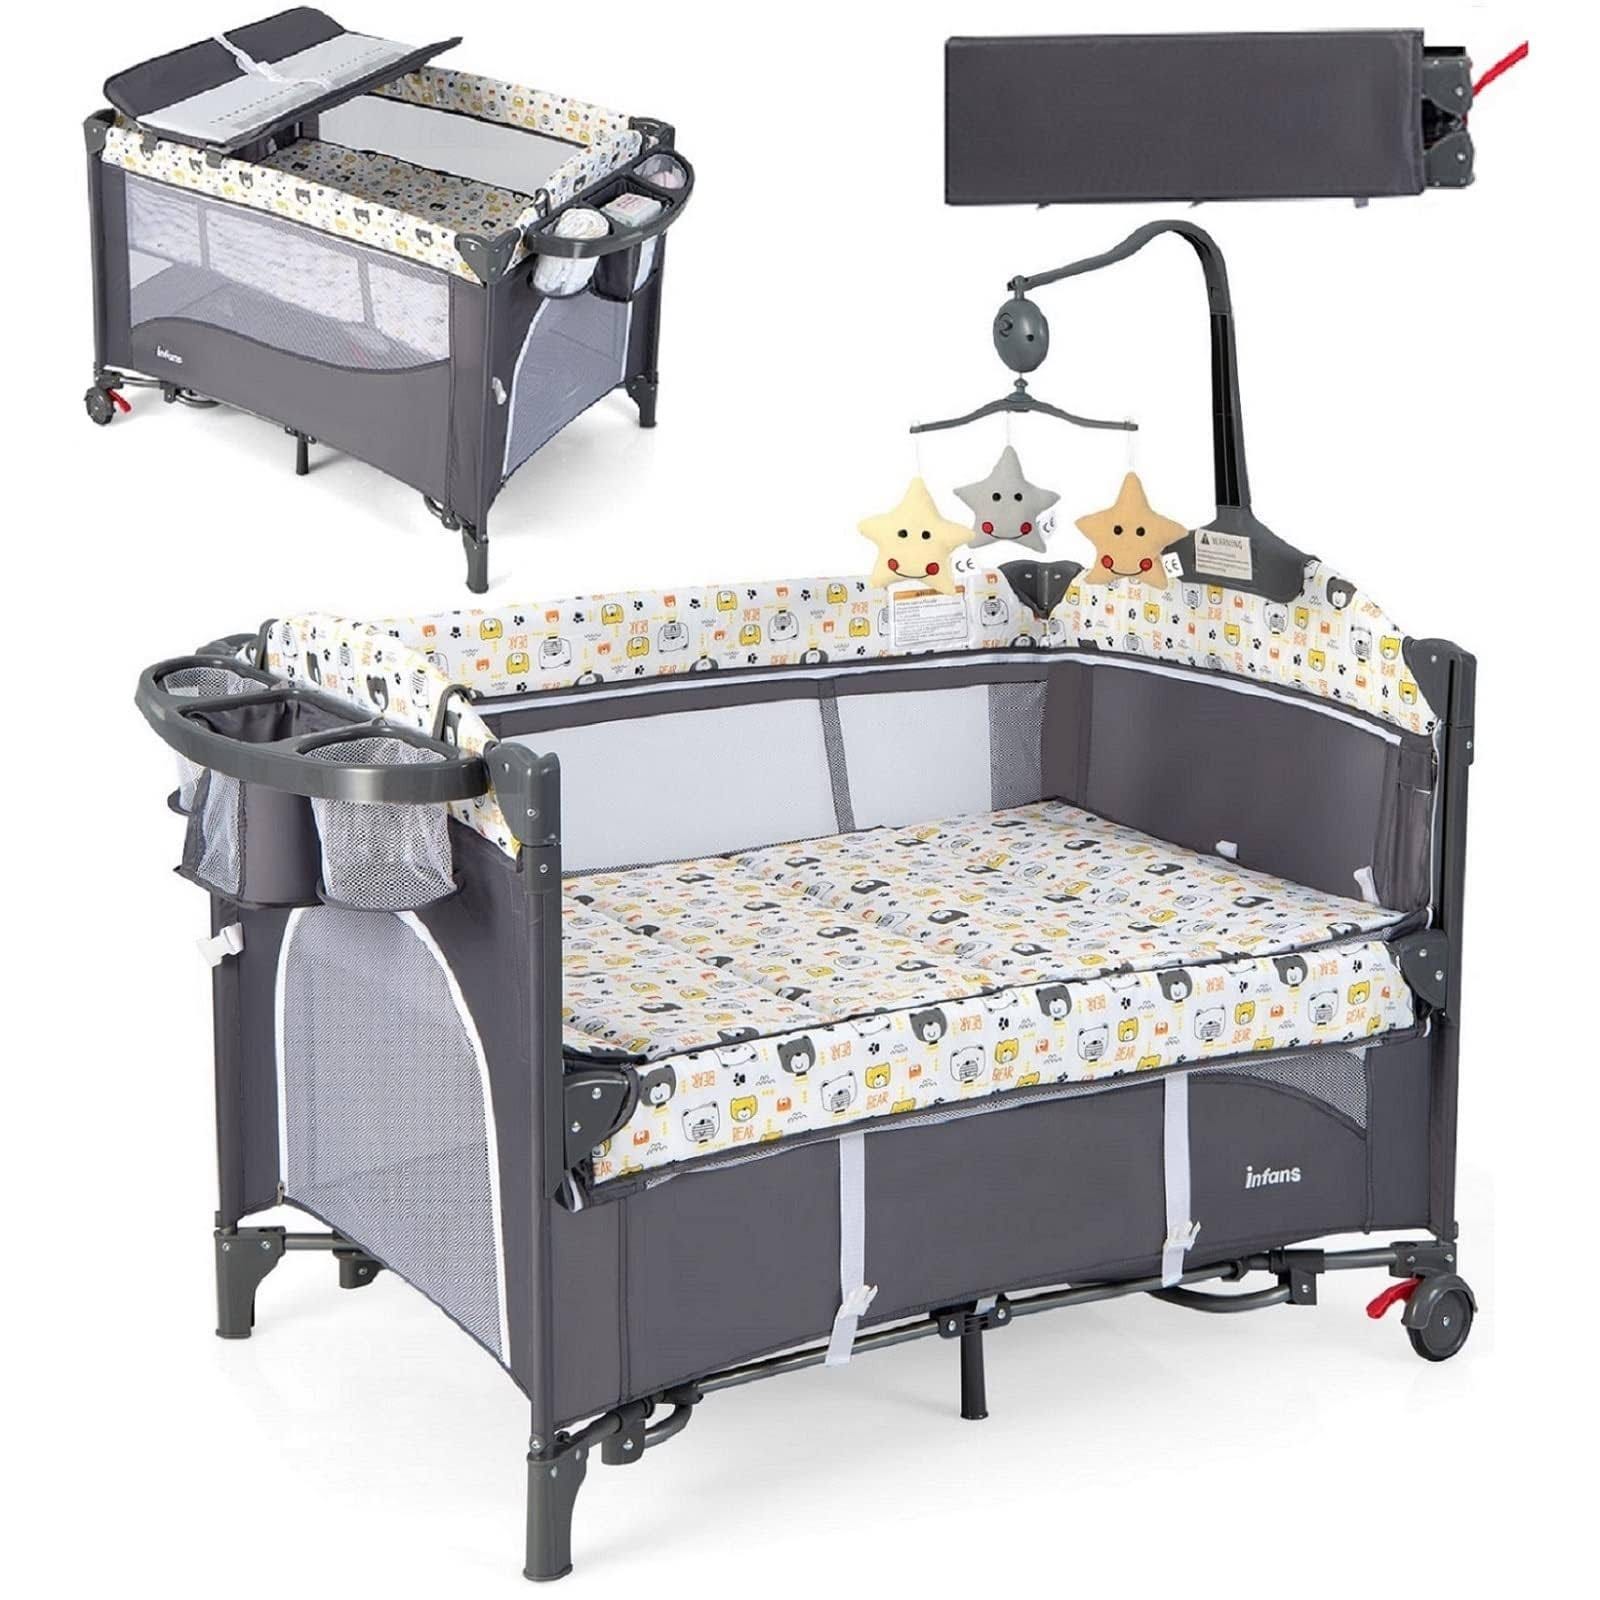 Infans 5-in-1 Foldable Nursery Center with Bassinet and Playpen | Image